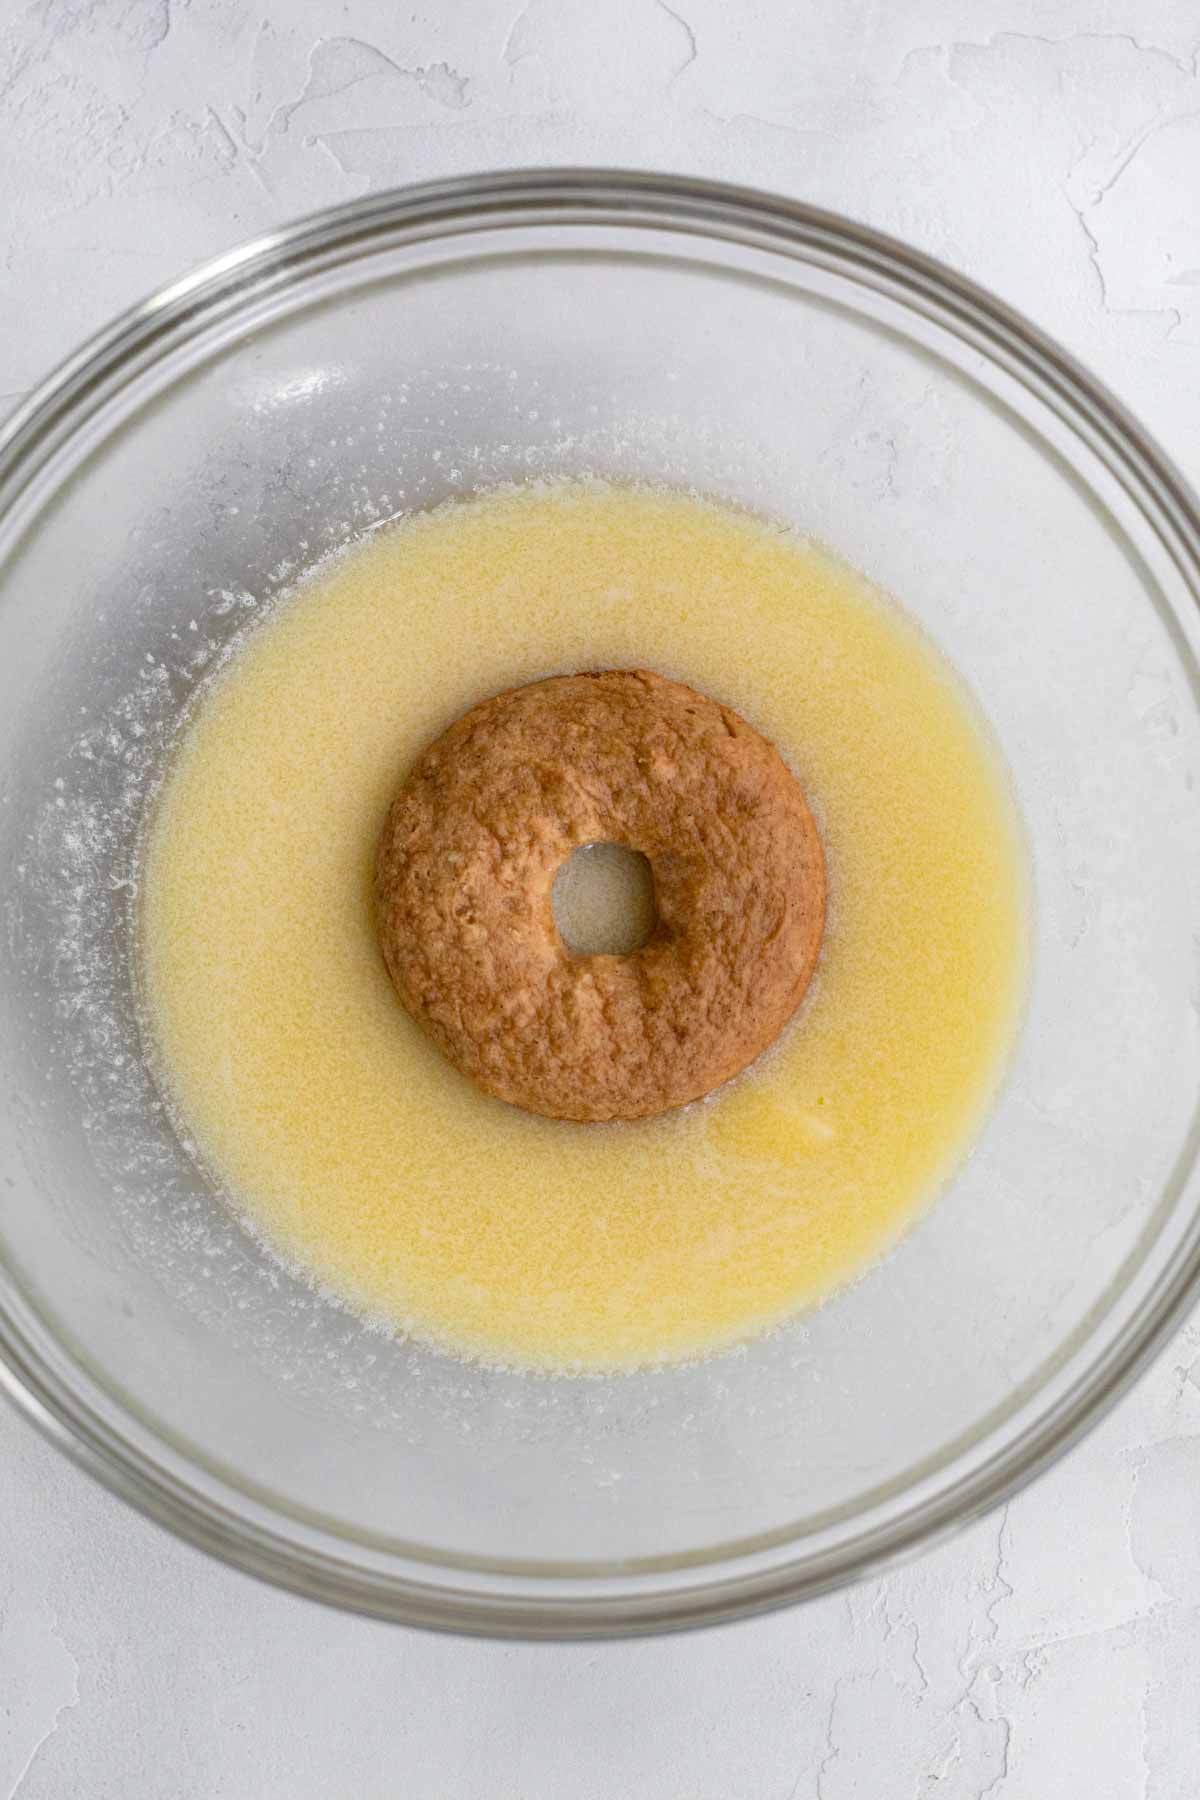 The plain donut in a bowl with melted butter.